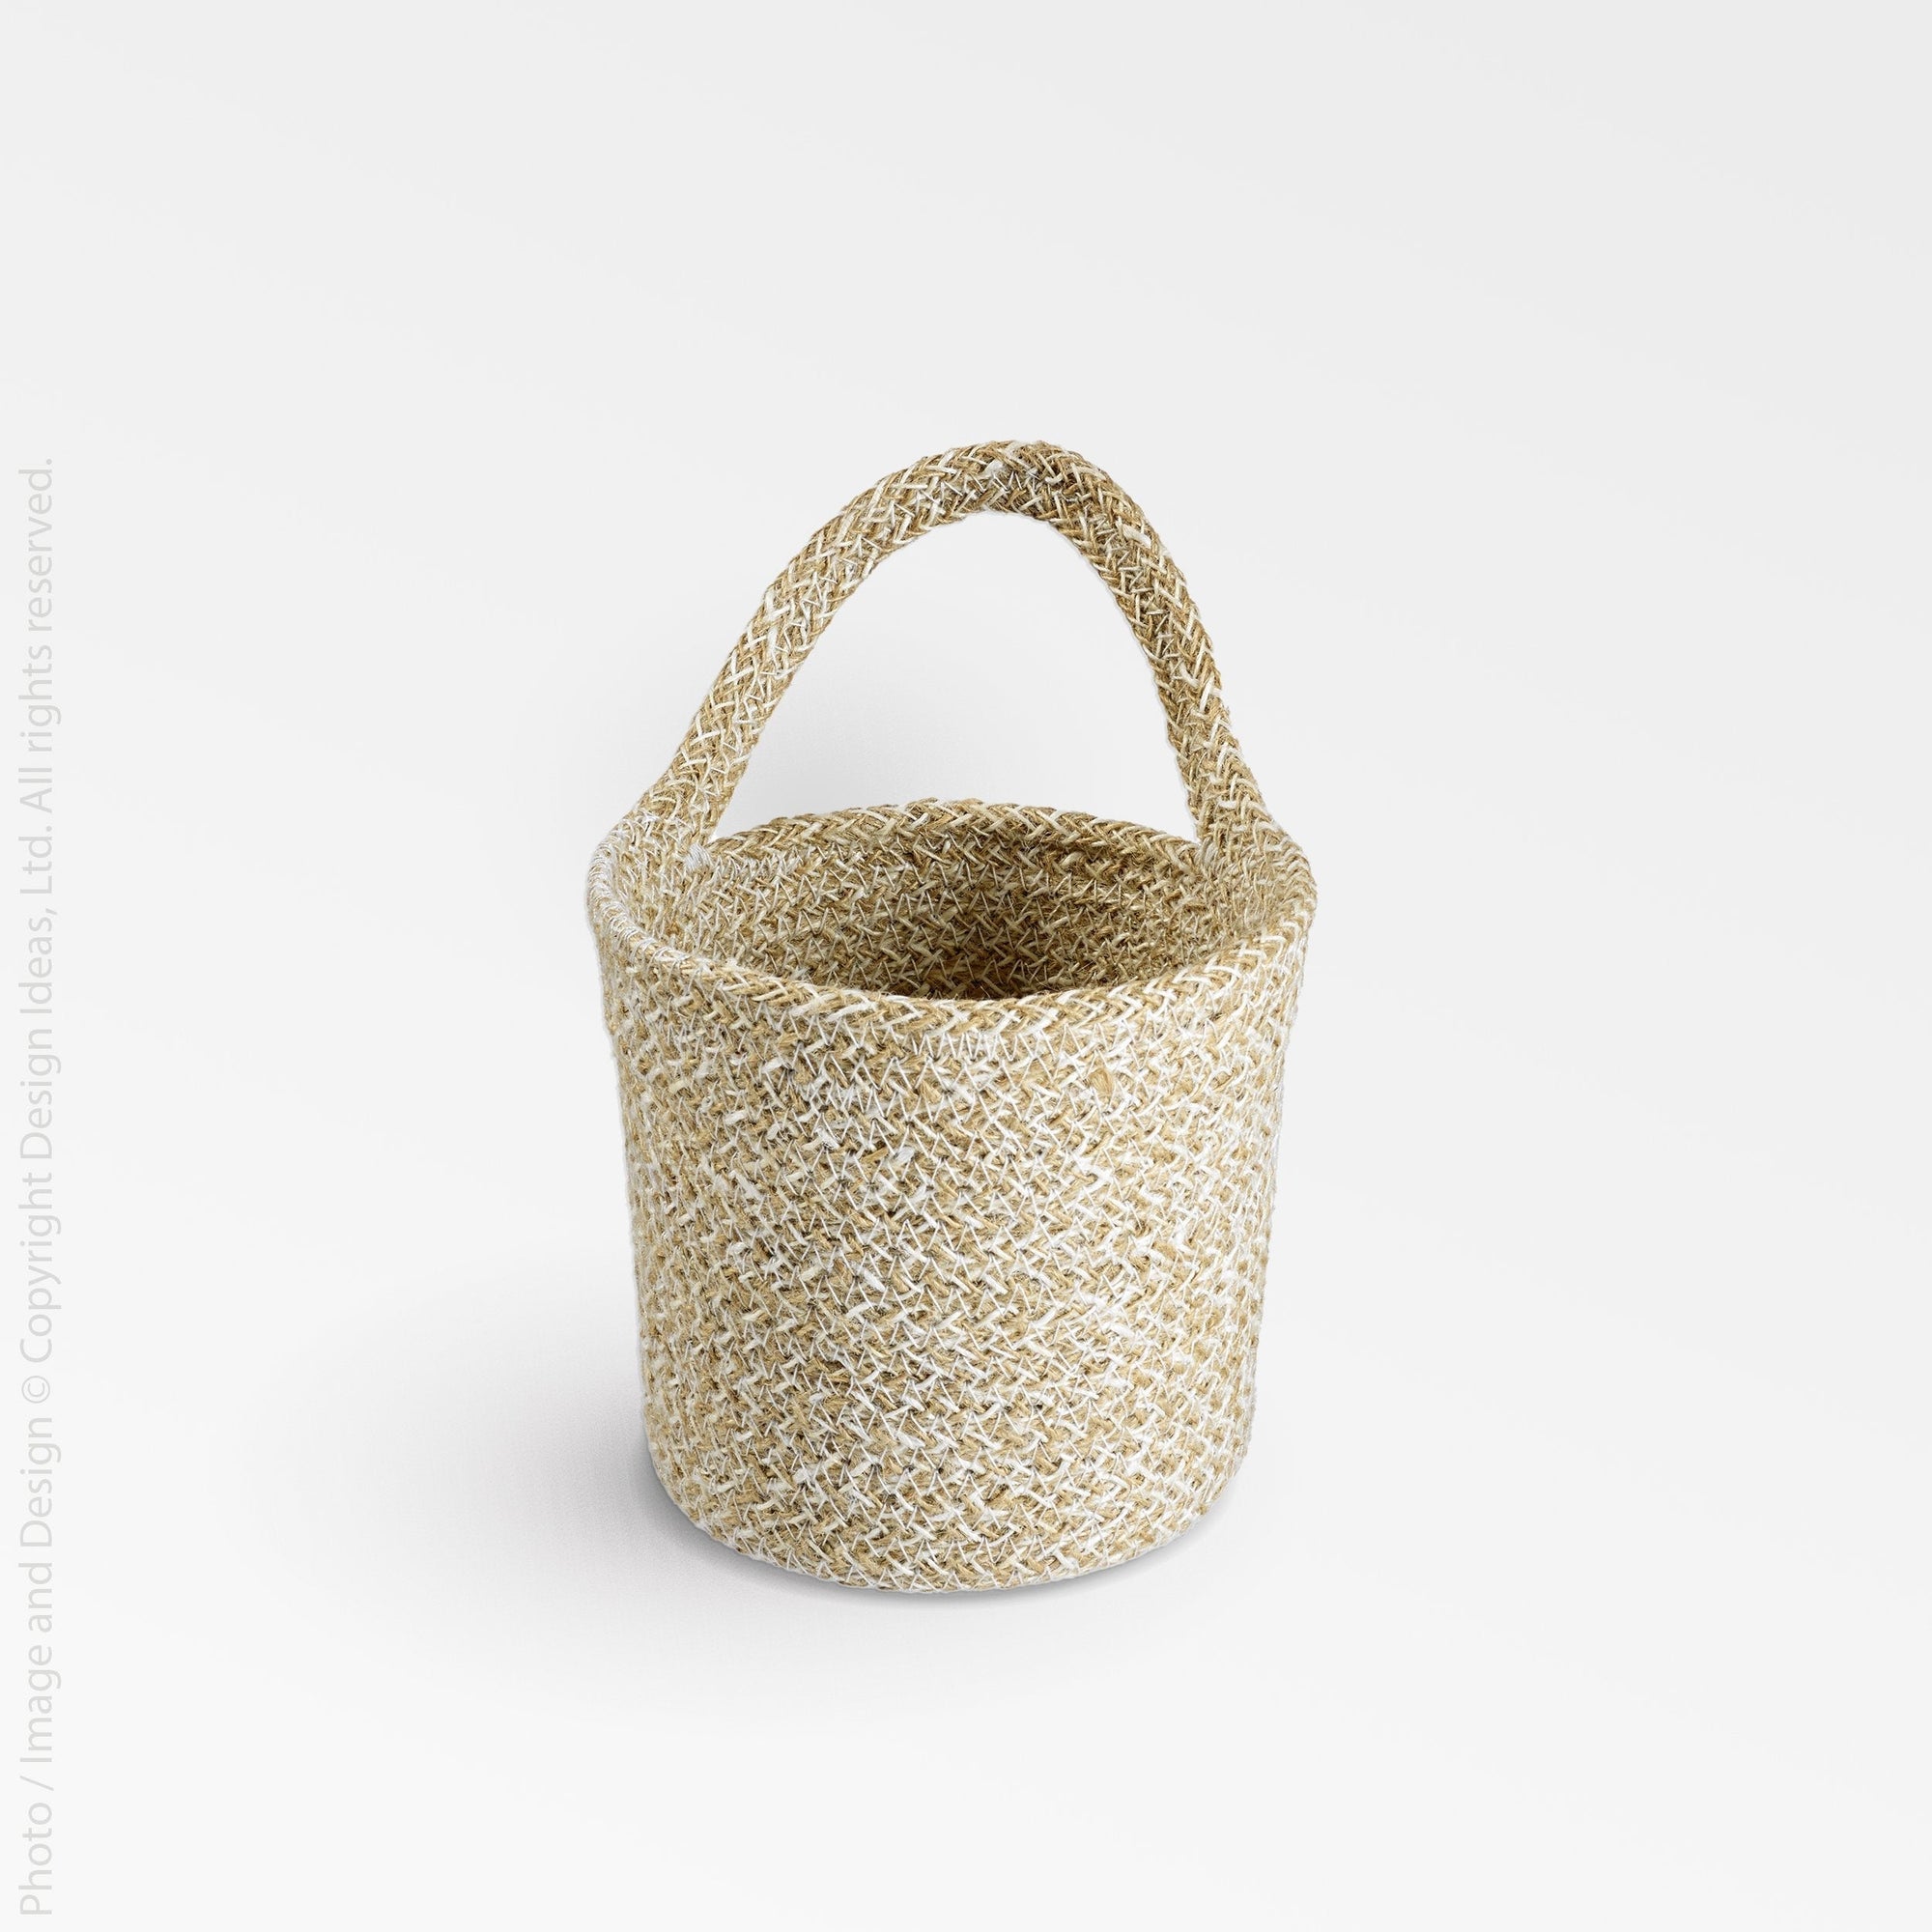 Melia™ hanging basket (4.6 x 5.2 x 4.8 in.) - Black | Image 1 | Premium Basket from the Melia collection | made with Jute for long lasting use | texxture